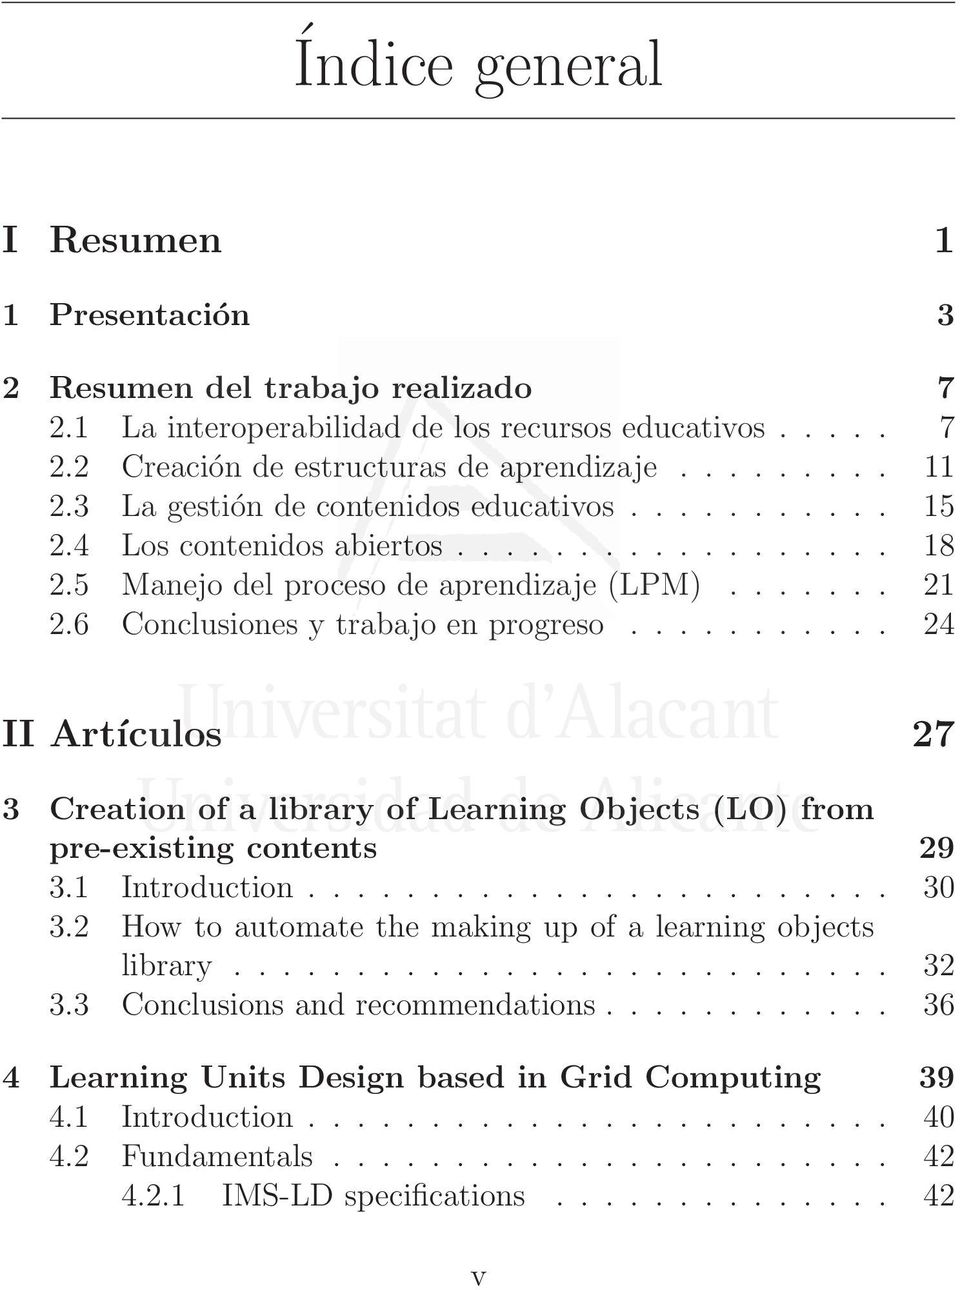 .......... 24 II Artículos 27 3 Creation of a library of Learning Objects (LO) from pre-existing contents 29 3.1 Introduction........................ 30 3.